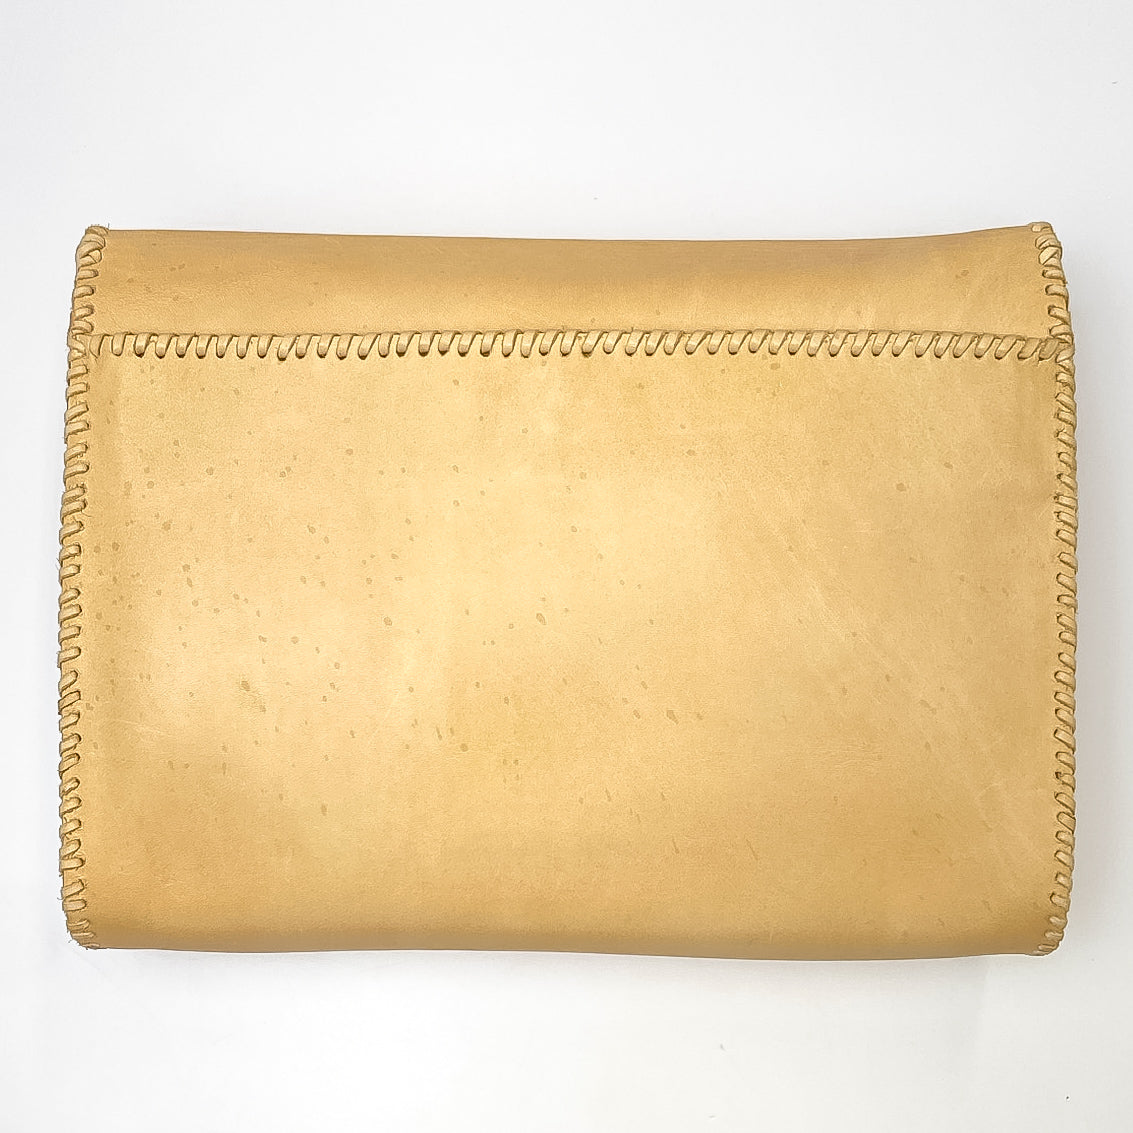 BLEMISHED | Consuela | Diego Around Town Crossbody - Giddy Up Glamour Boutique